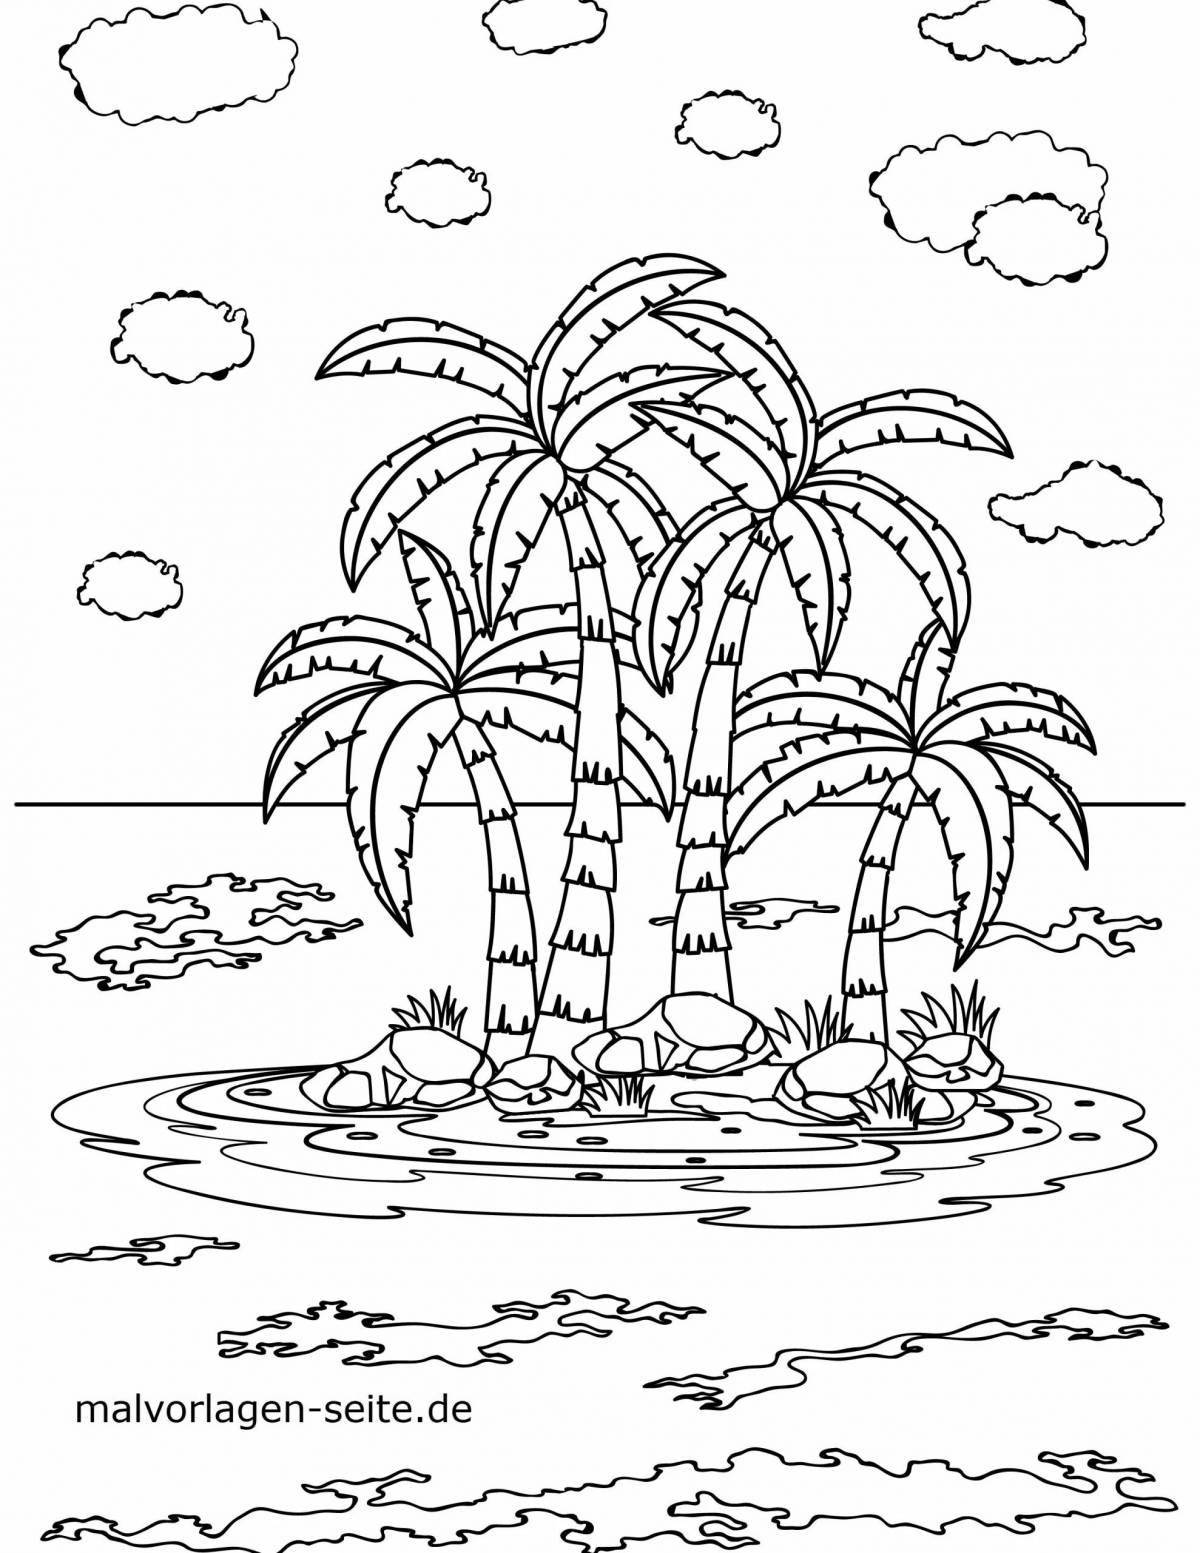 Coloring page happy island for kids